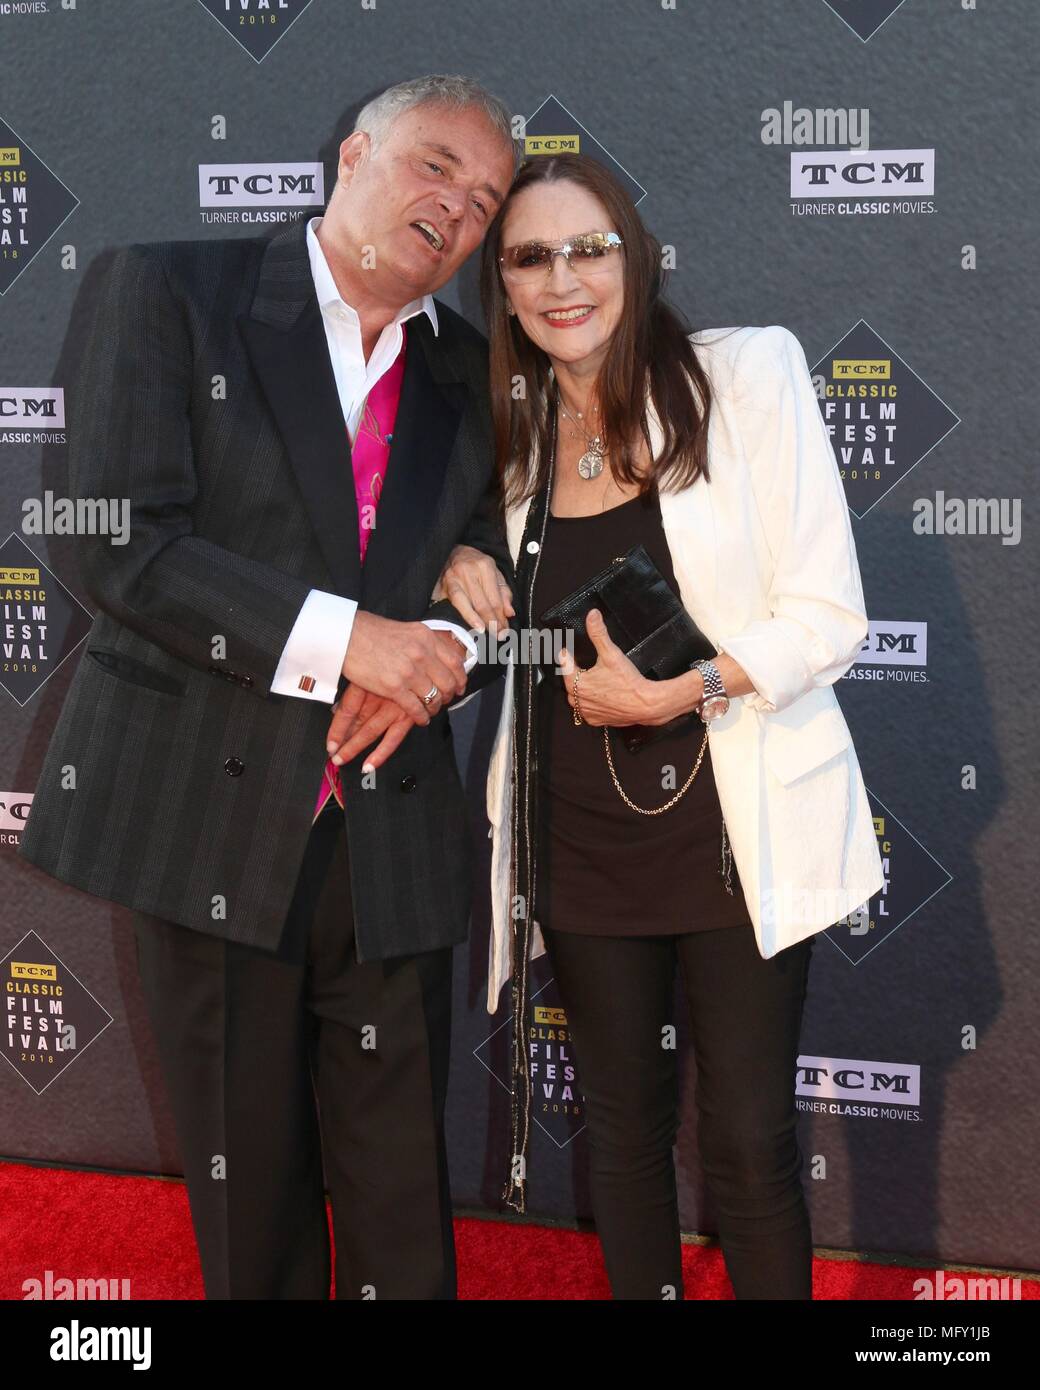 Los Angeles, CA, USA. 26th Apr, 2018. Leonard Whiting, Oliva Hussey at arrivals for The 50th Anniversary World Premiere Restoration of THE PRODUCERS at the Opening Night Gala of the 2018 TCM Classic Film Festival, TCL Chinese Theatre (formerly Grauman's), Los Angeles, CA April 26, 2018. Credit: Priscilla Grant/Everett Collection/Alamy Live News Stock Photo